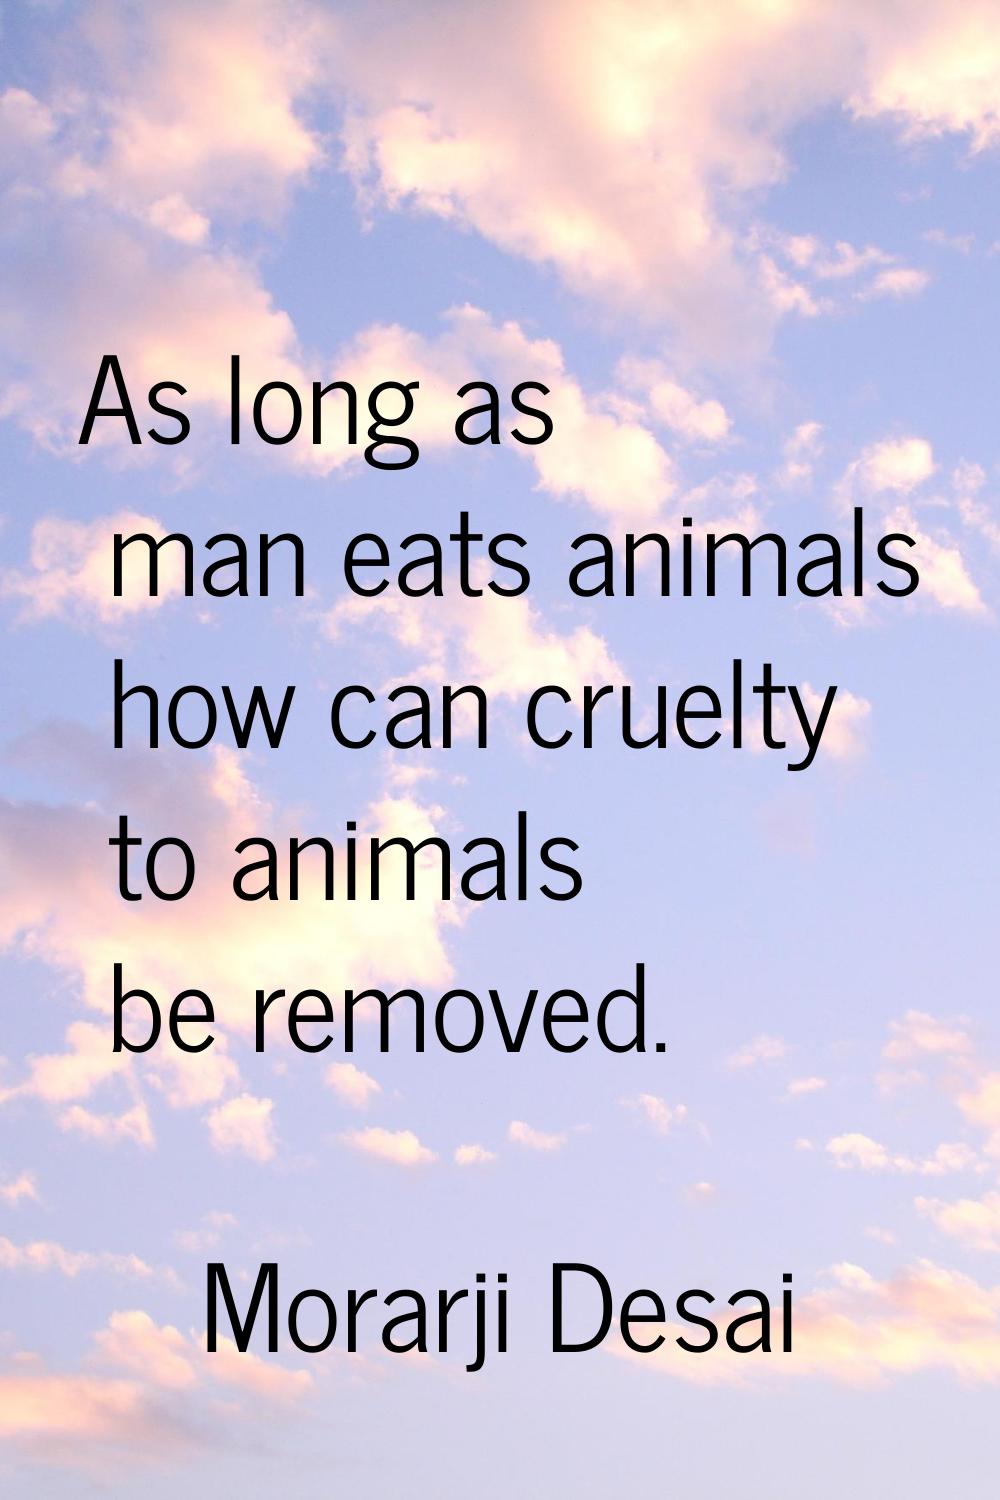 As long as man eats animals how can cruelty to animals be removed.